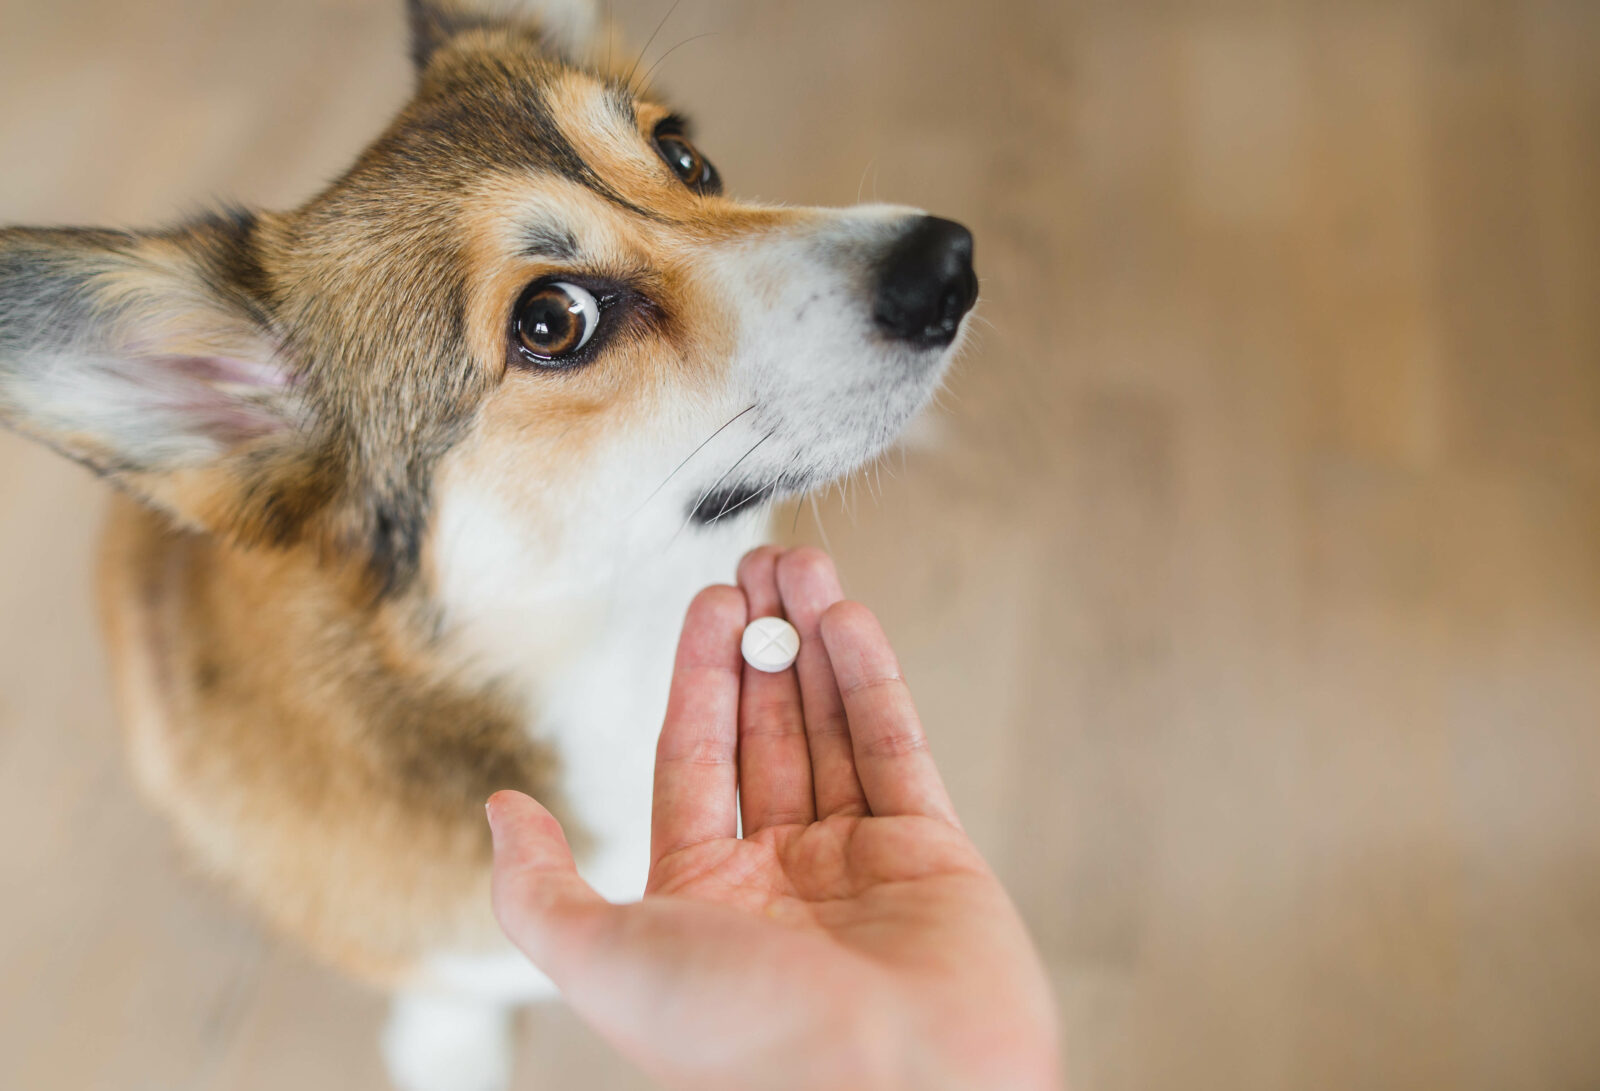 How to give your dog a pill. Hand trying to give pill to dog. Dog turning face away